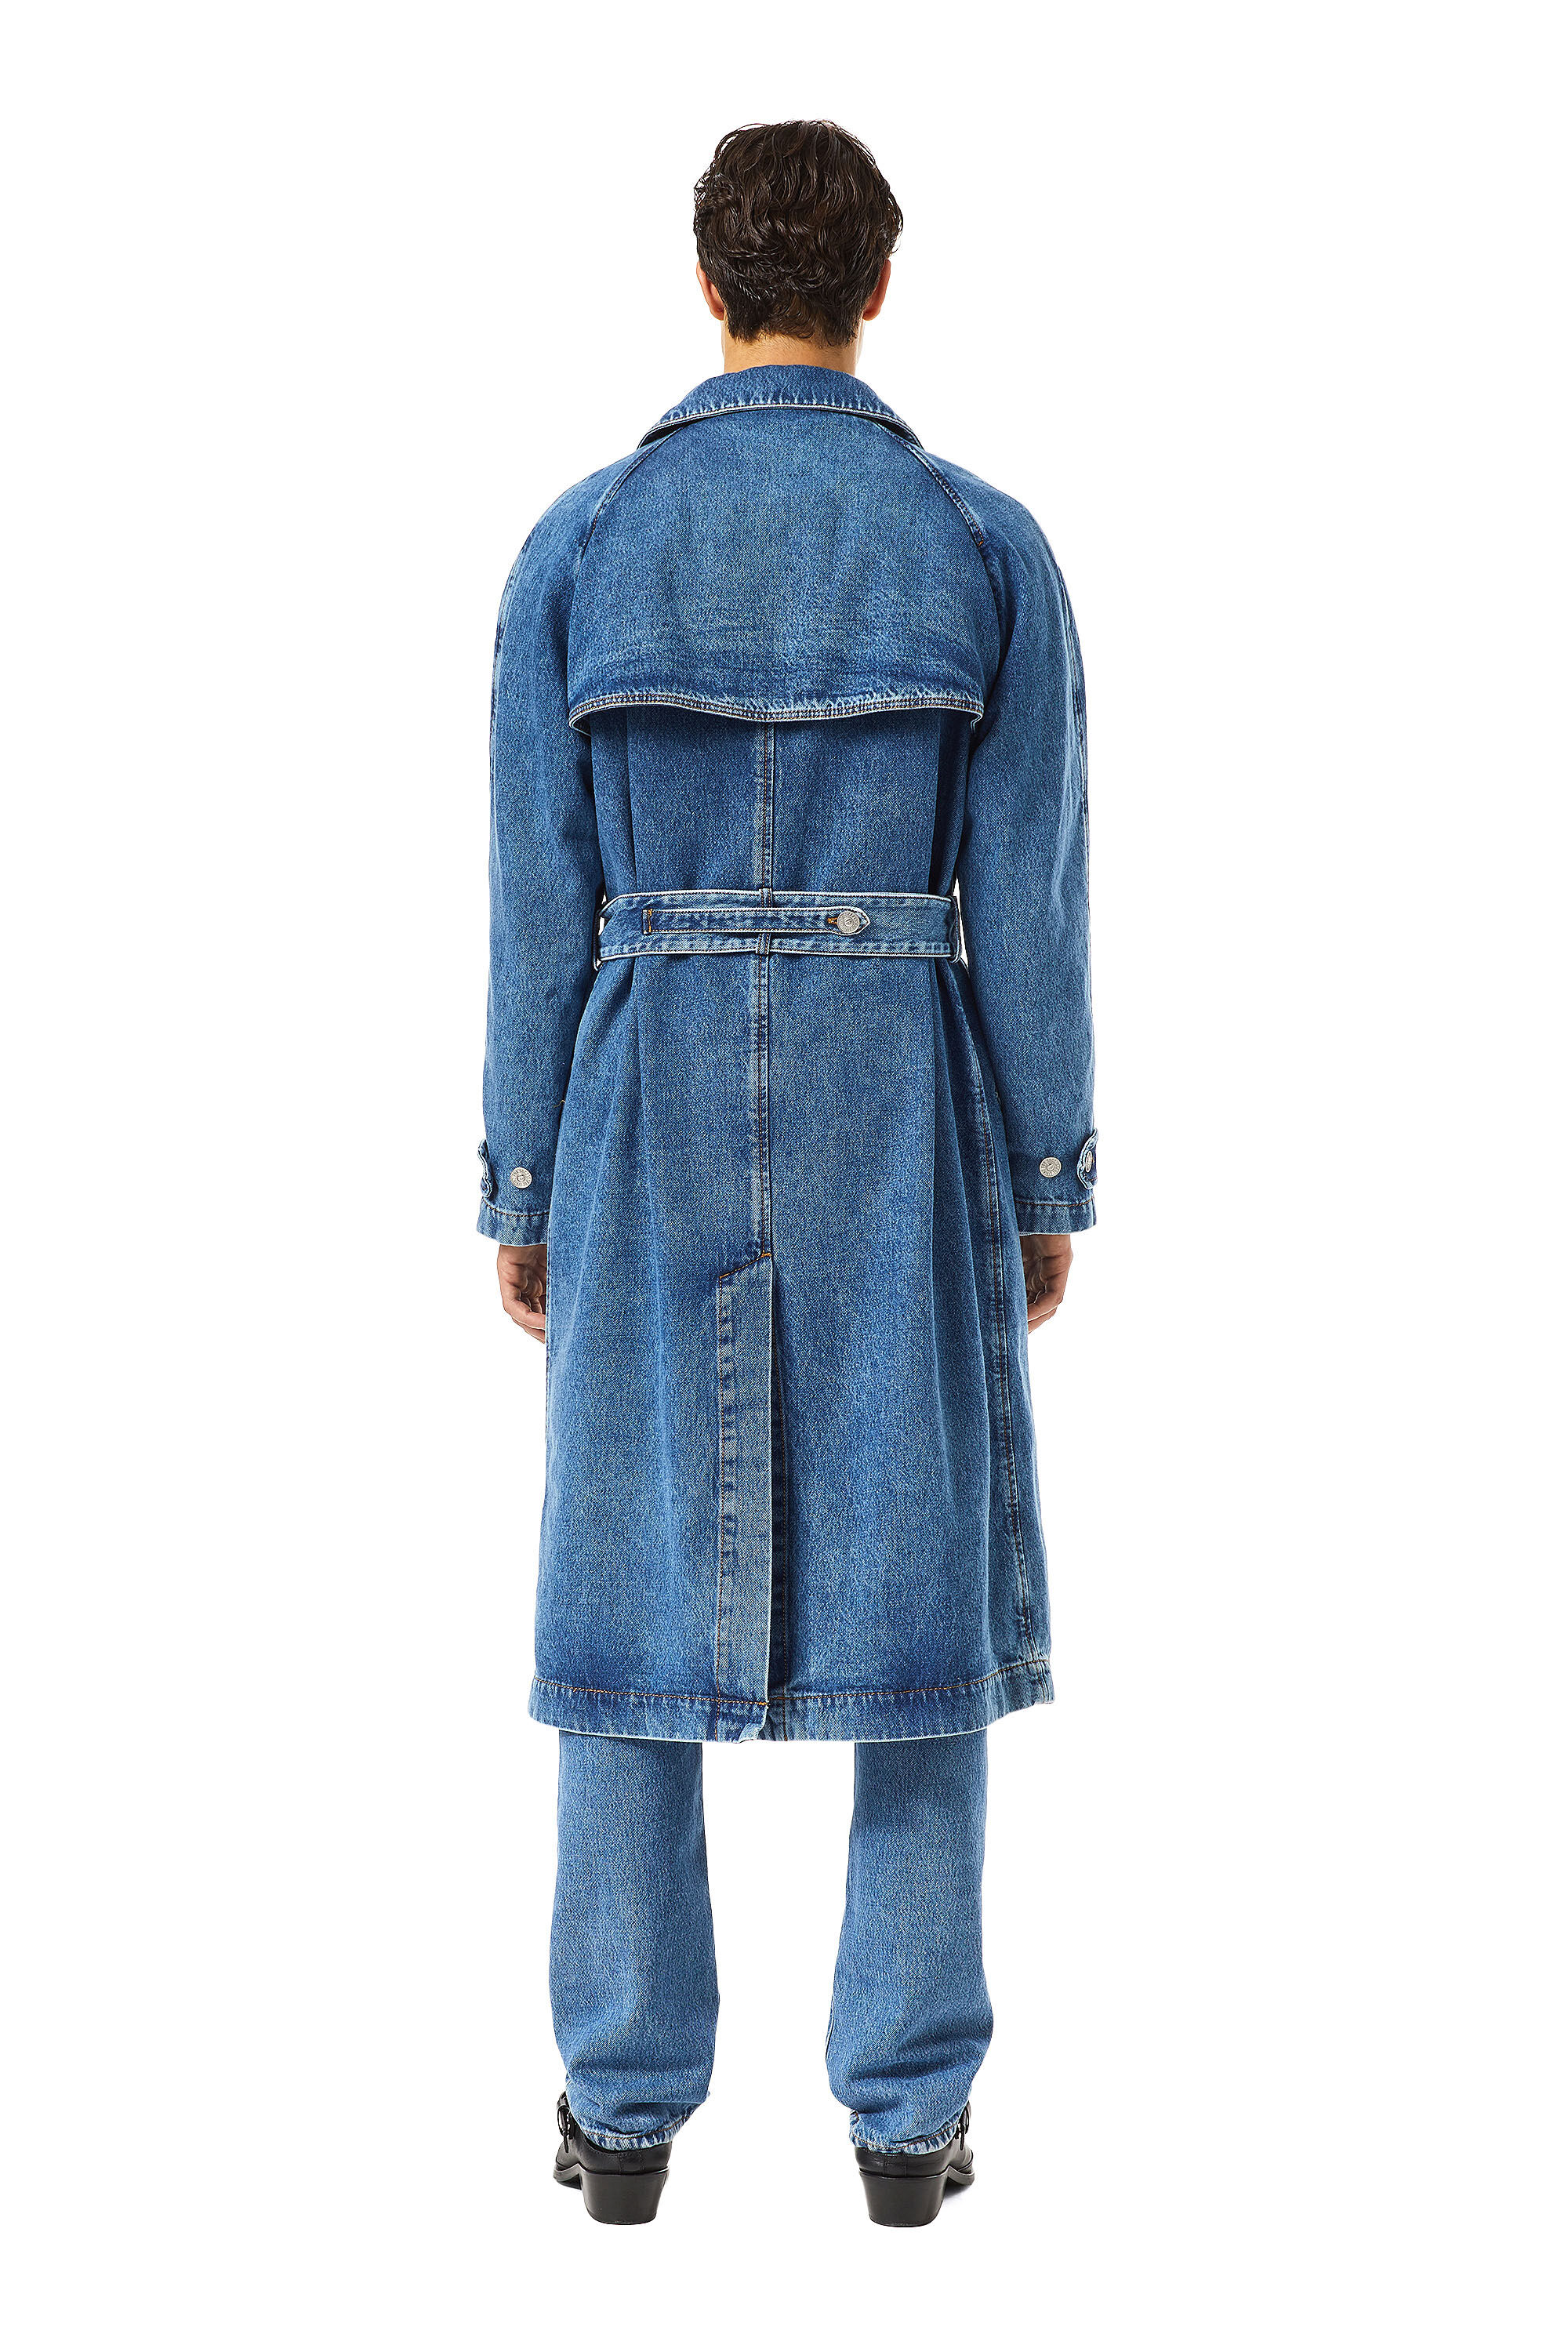 Diesel - D-DELIRIOUS DOUBLE BREASTED TRENCH COAT, Unisex Trench coat in denim in Blue - Image 4